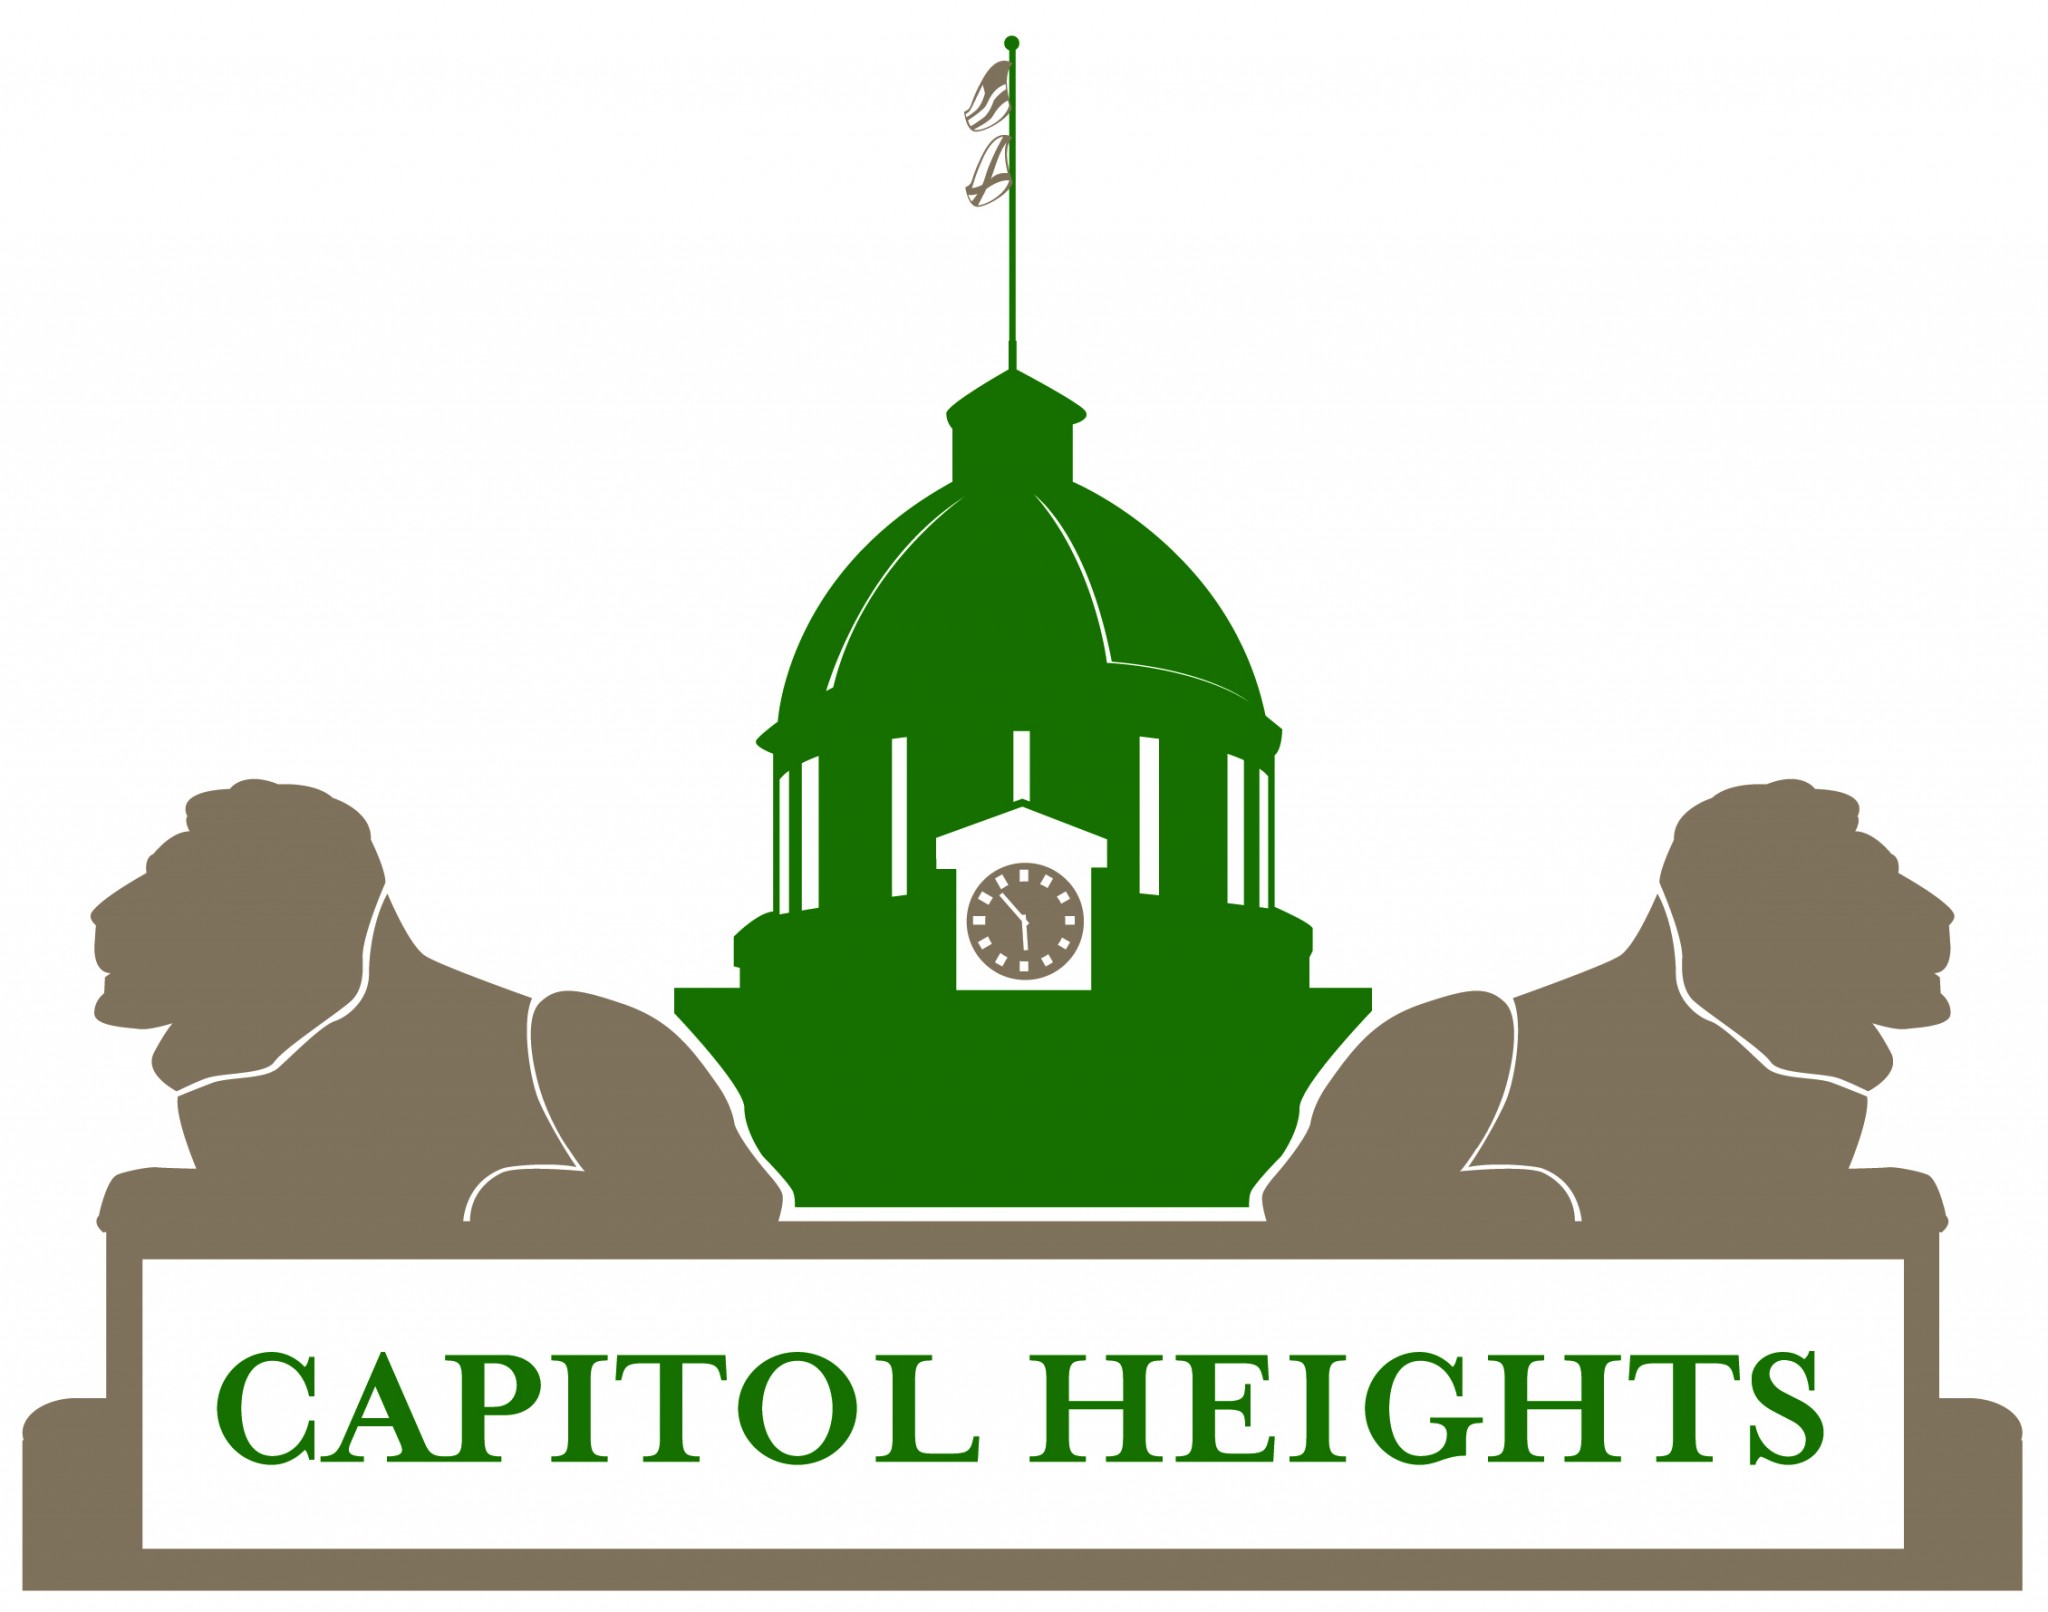 Historic Capitol Heights